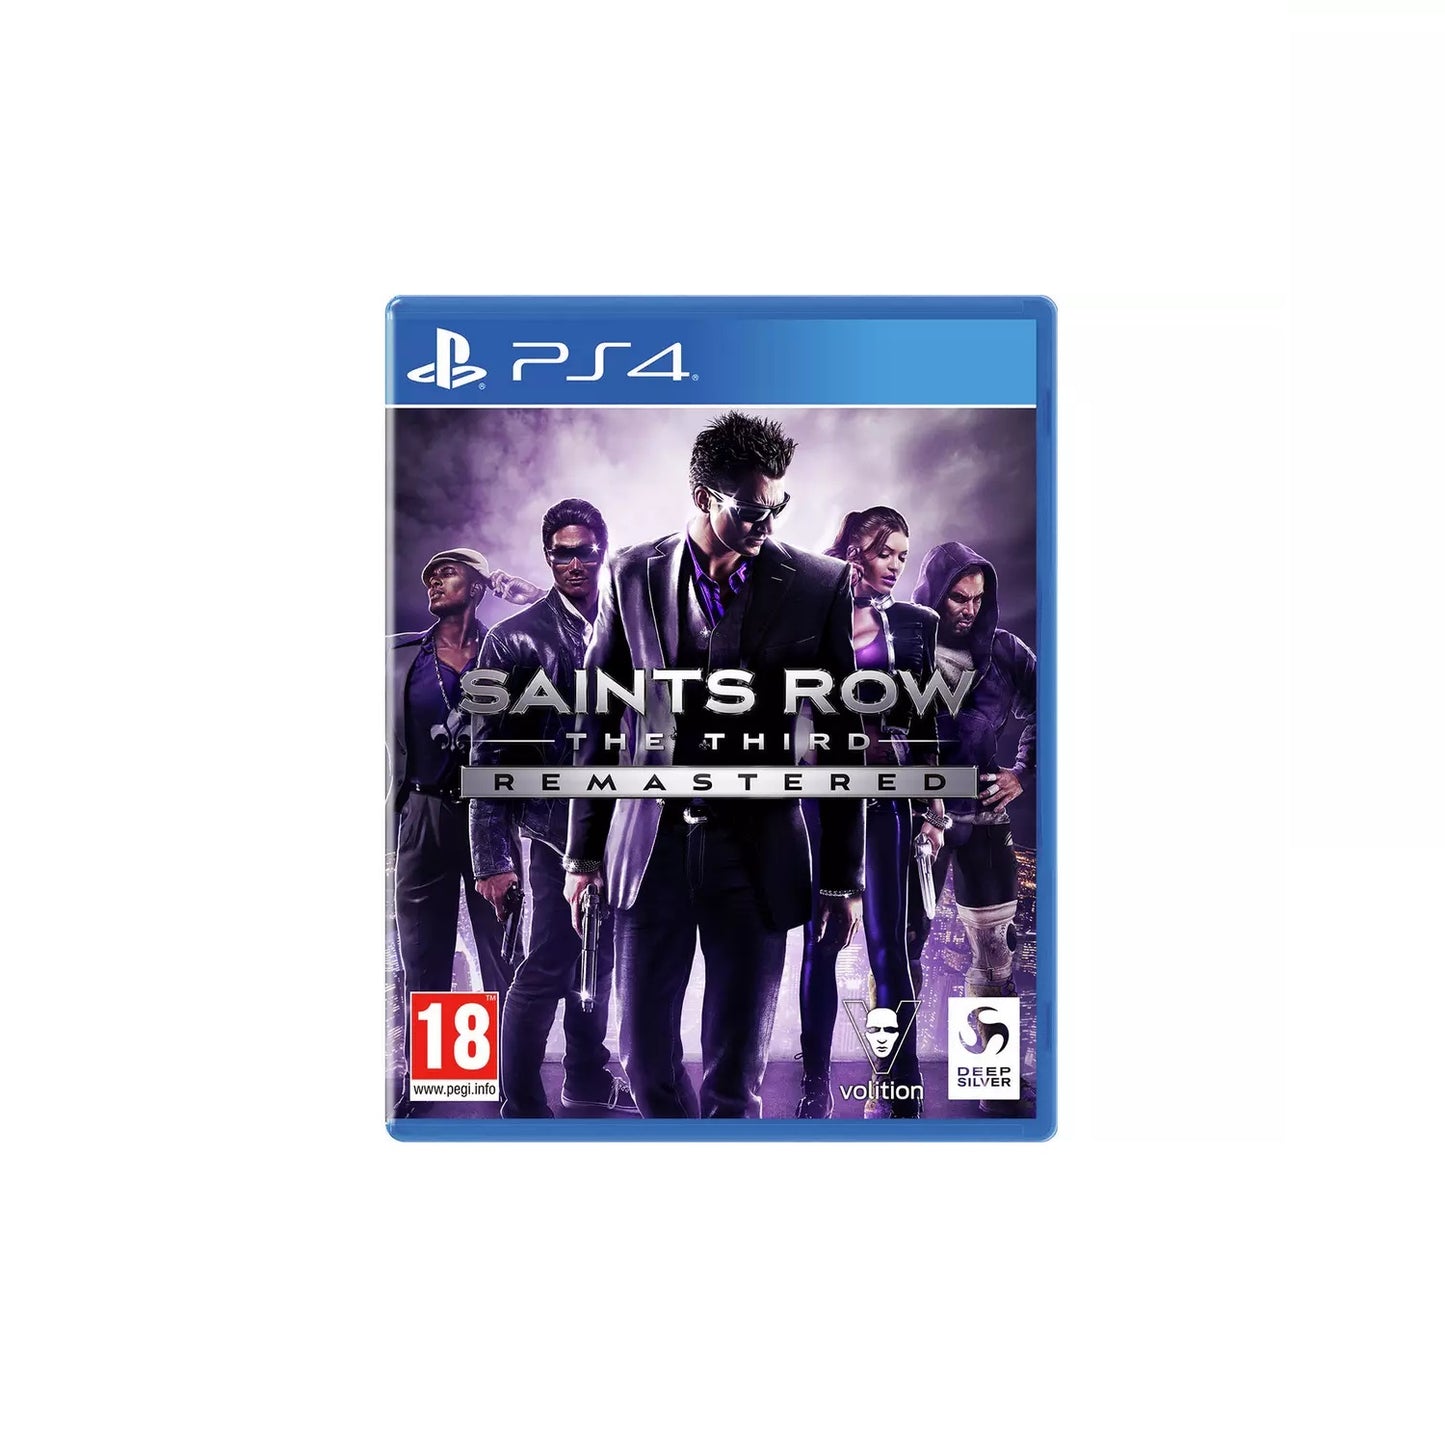 PS4 - Saints Row The Third Remastered (18) Preowned